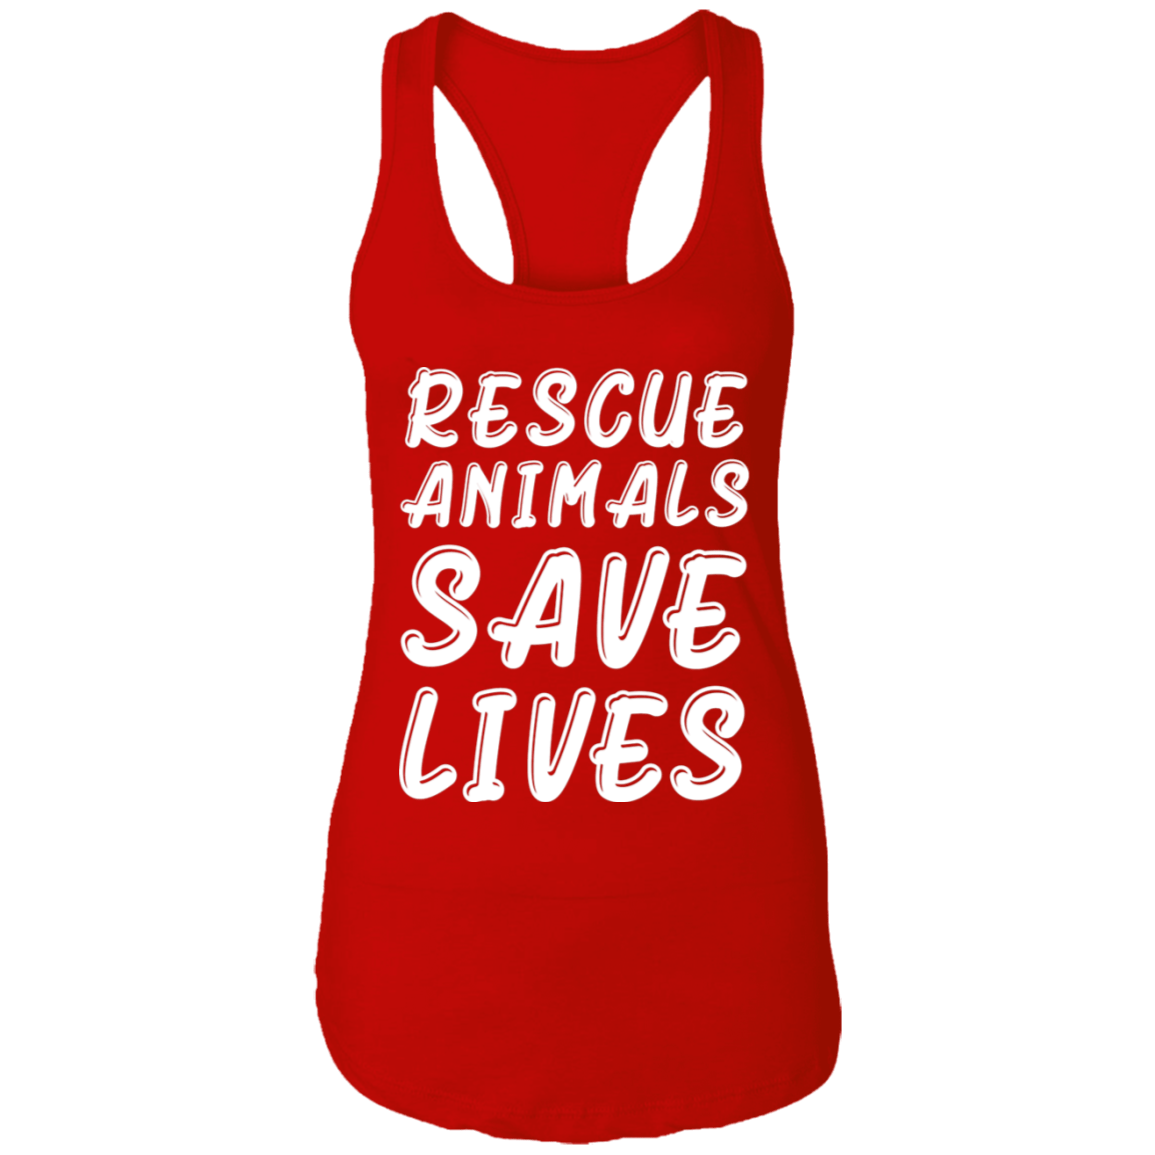 Rescue Animals Save Lives - Ladies Racer Back Tank.